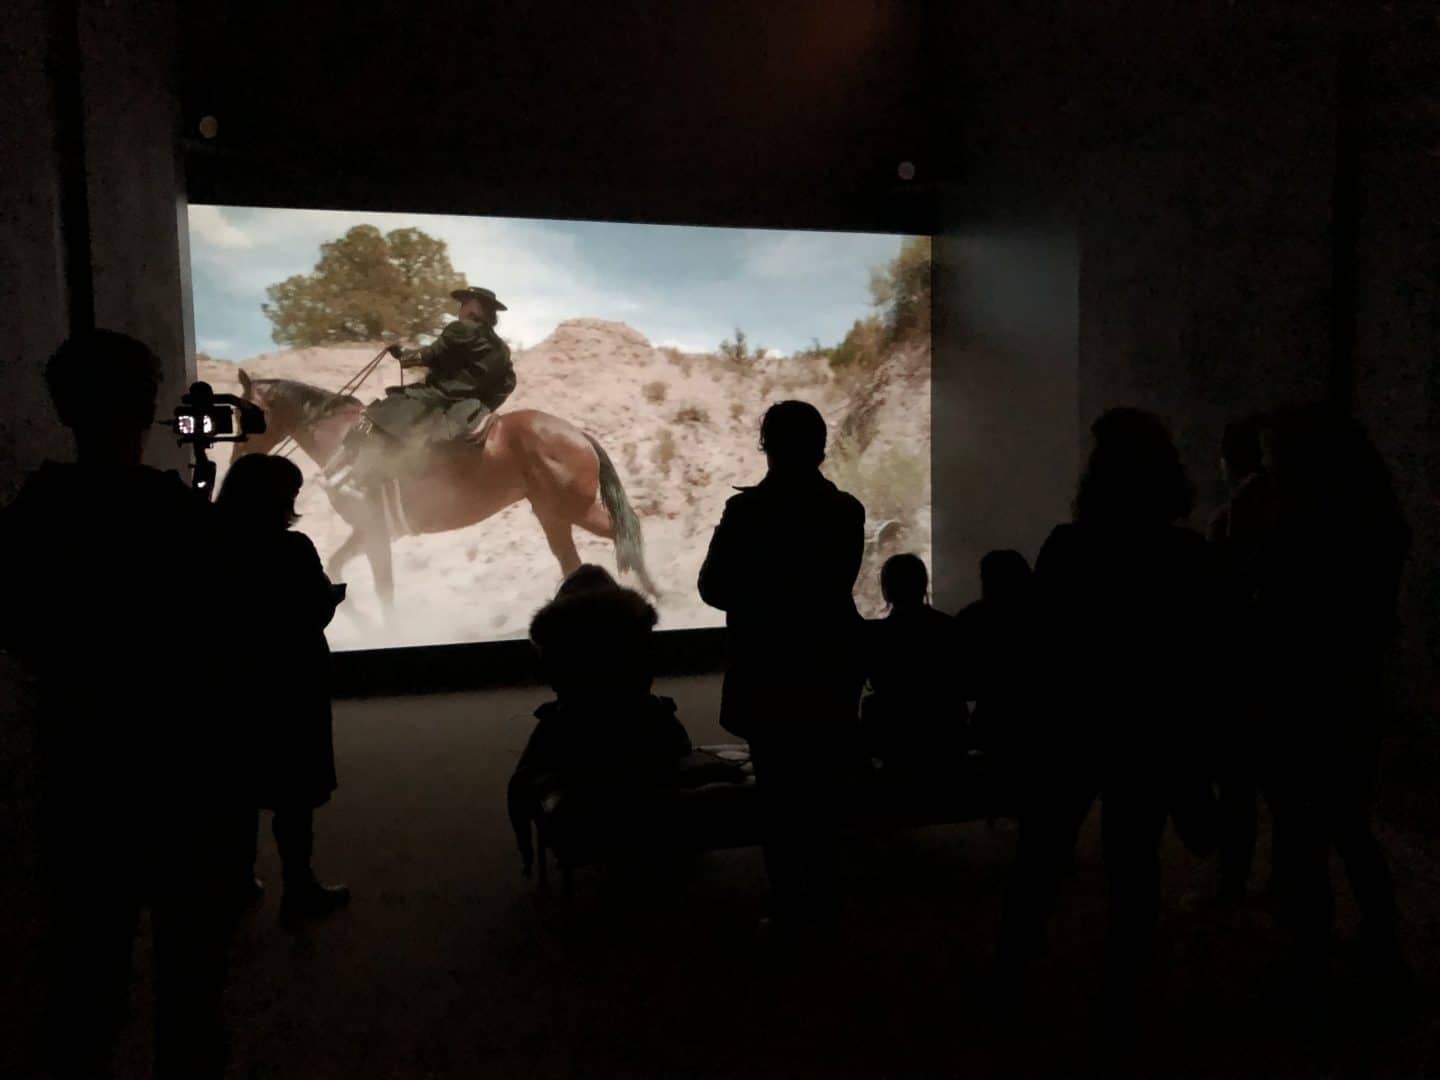 Raven Chacon and Cristóbal Martínez, A Song Often Played on the Radio, 2018, digital video from the exhibition Soundings: An Exhibition in Five Parts.